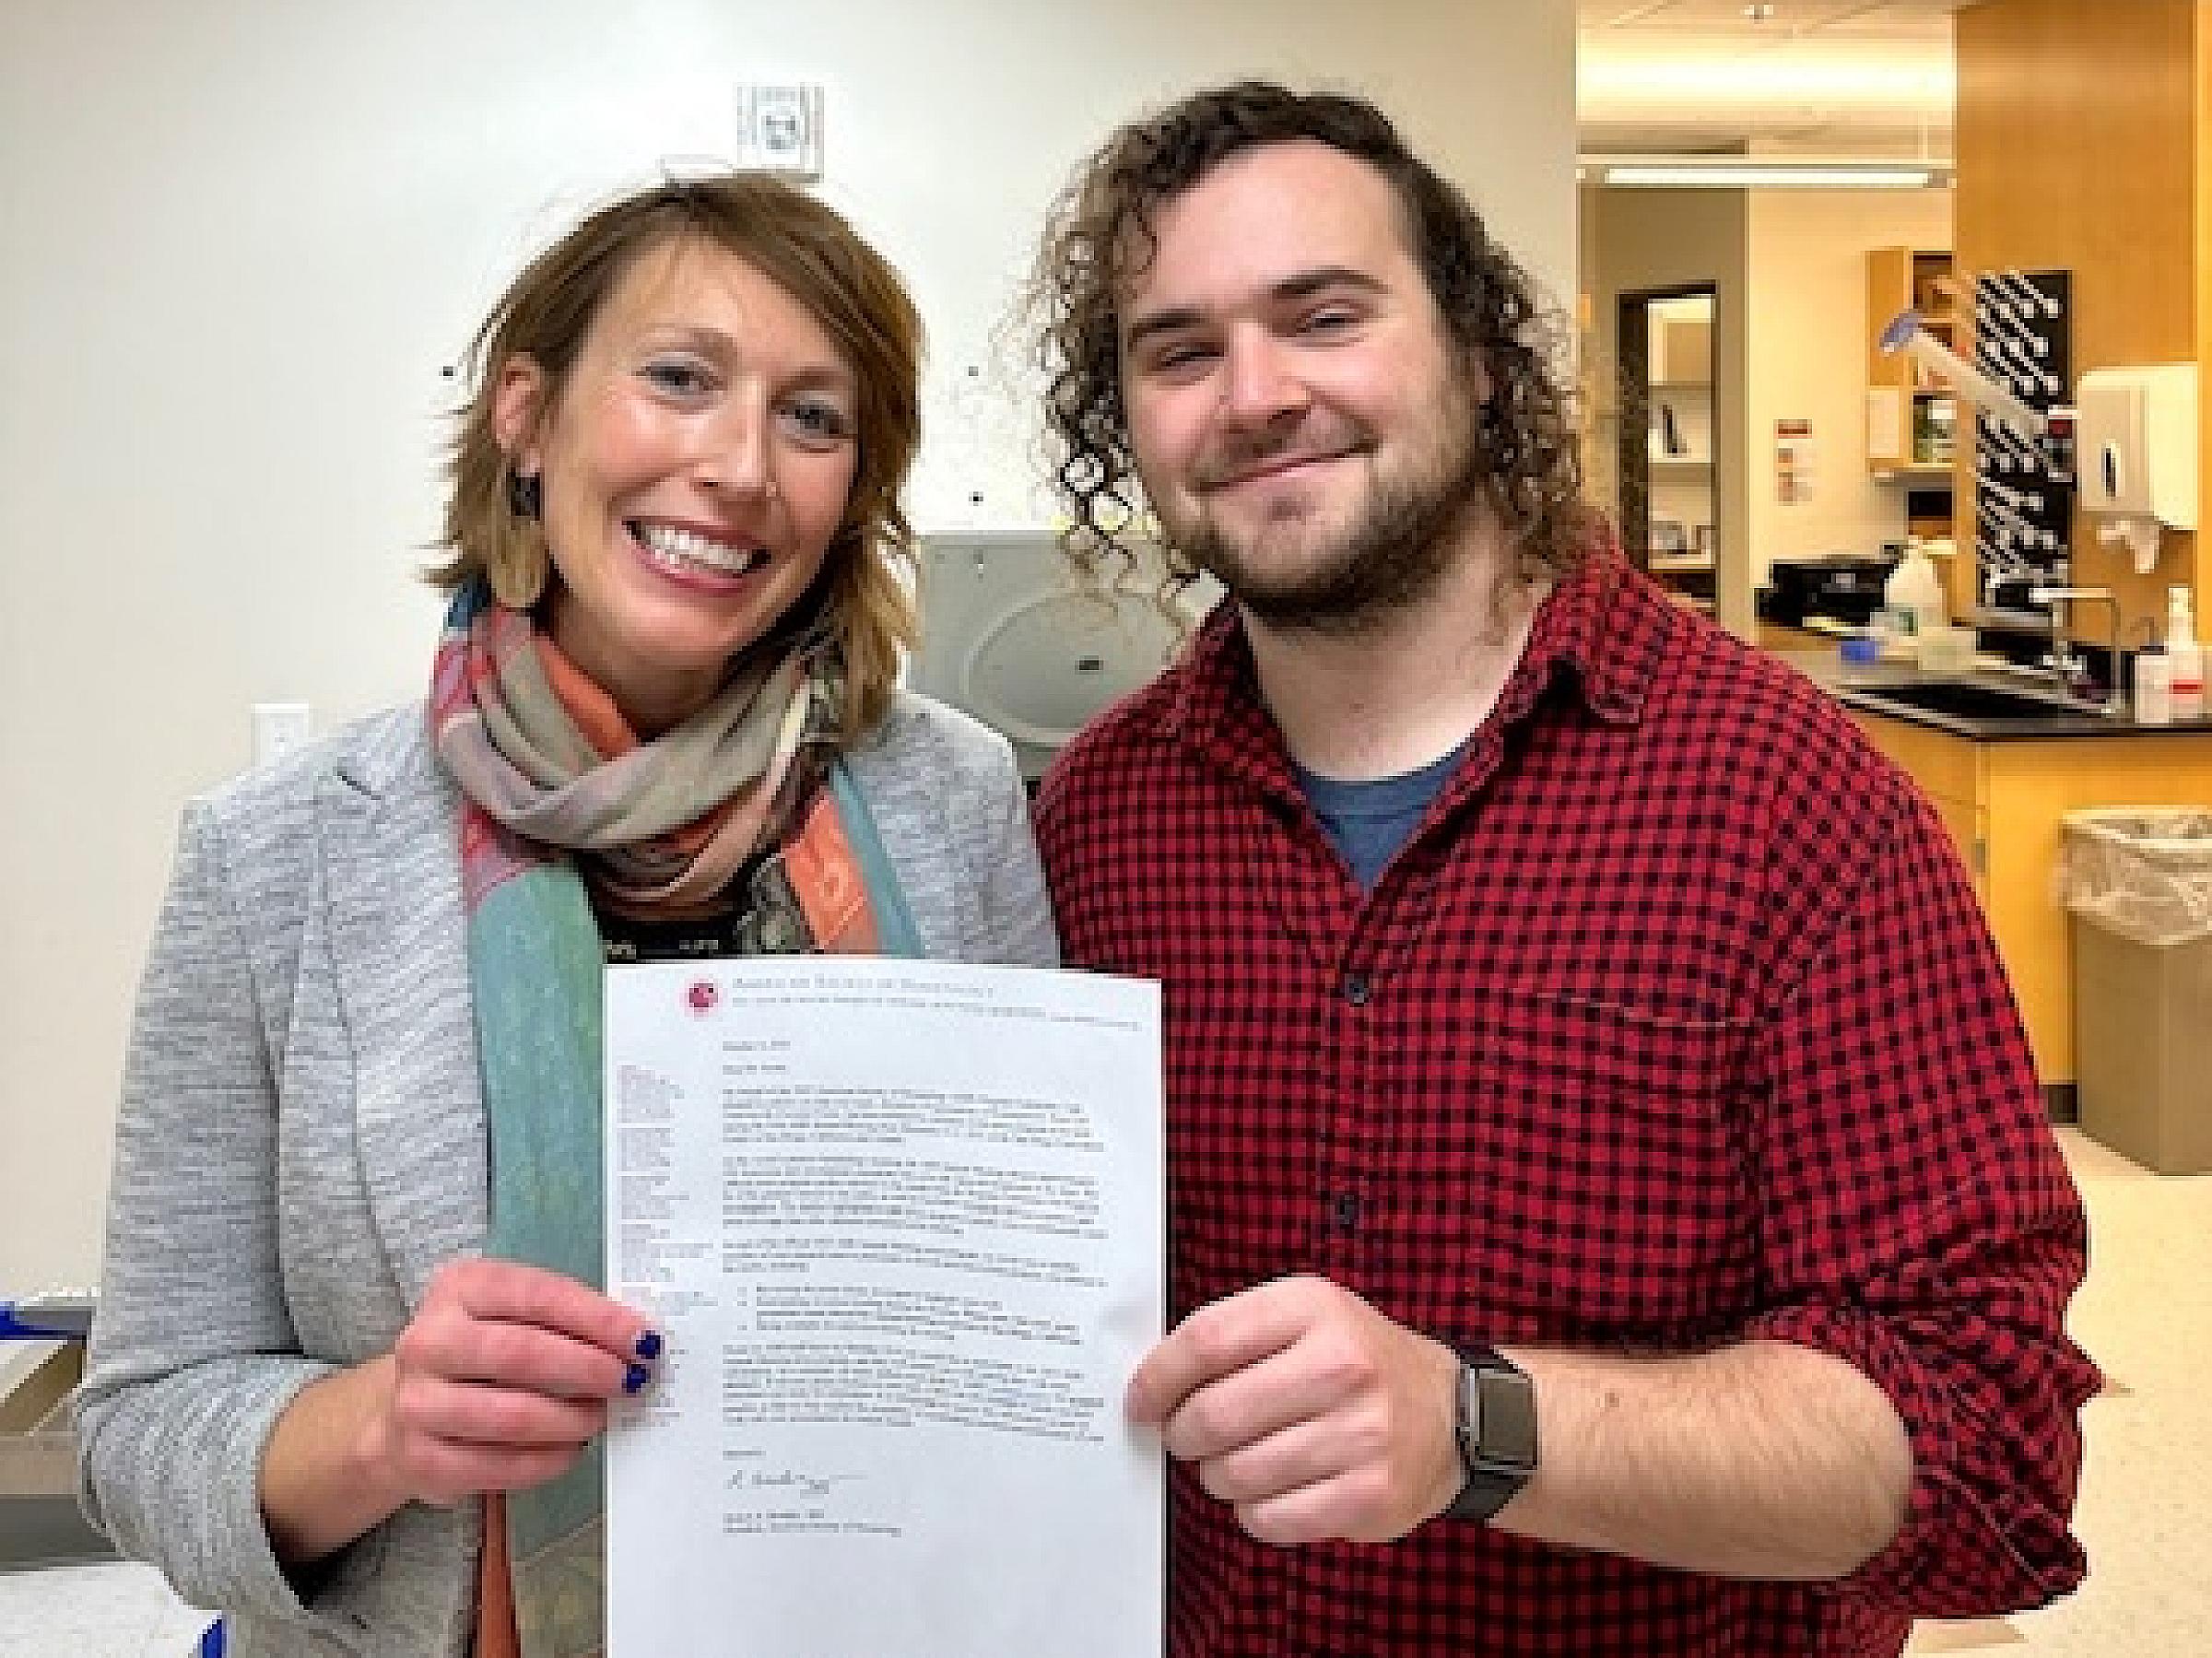 Anna Beaudin, PhD, and Brian Krum holding ASH acceptance letter